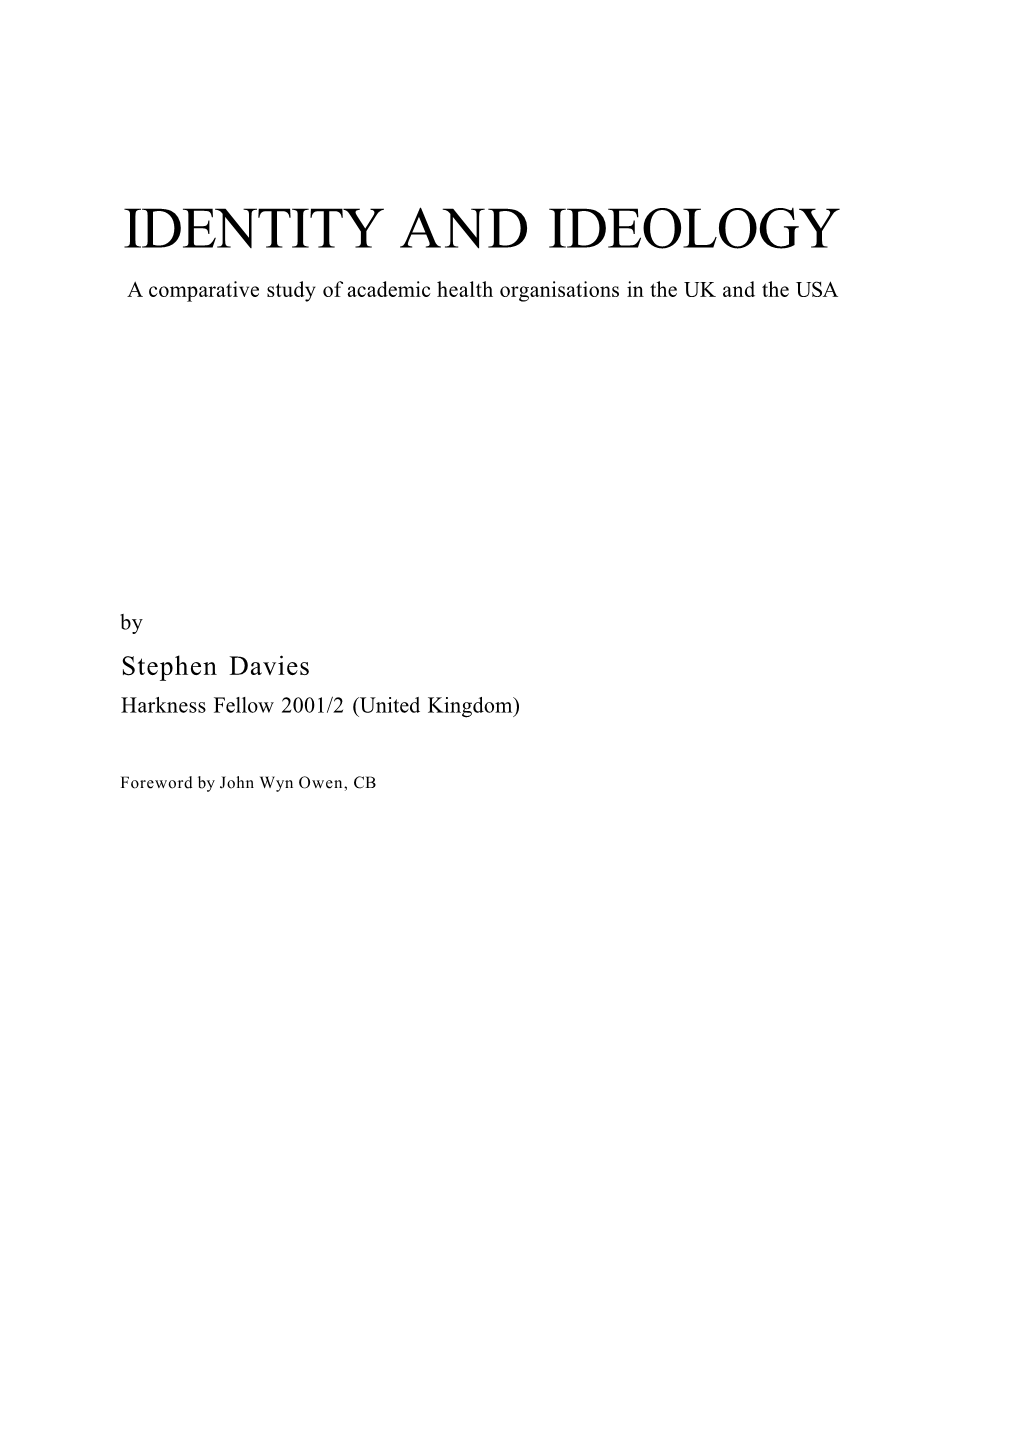 IDENTITY and IDEOLOGY a Comparative Study of Academic Health Organisations in the UK and the USA